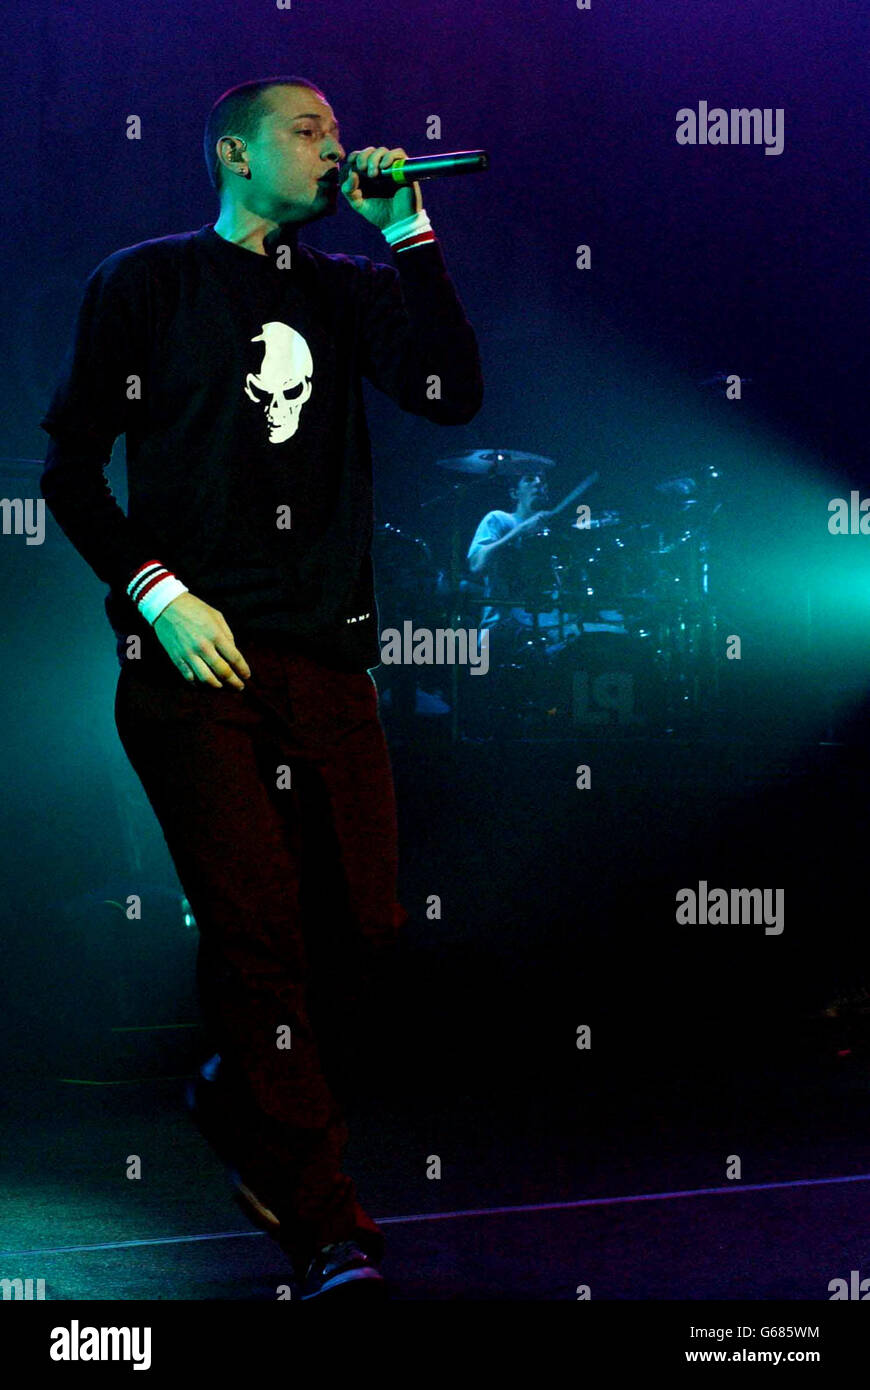 Chester Bennington High Resolution Stock Photography and Images - Alamy